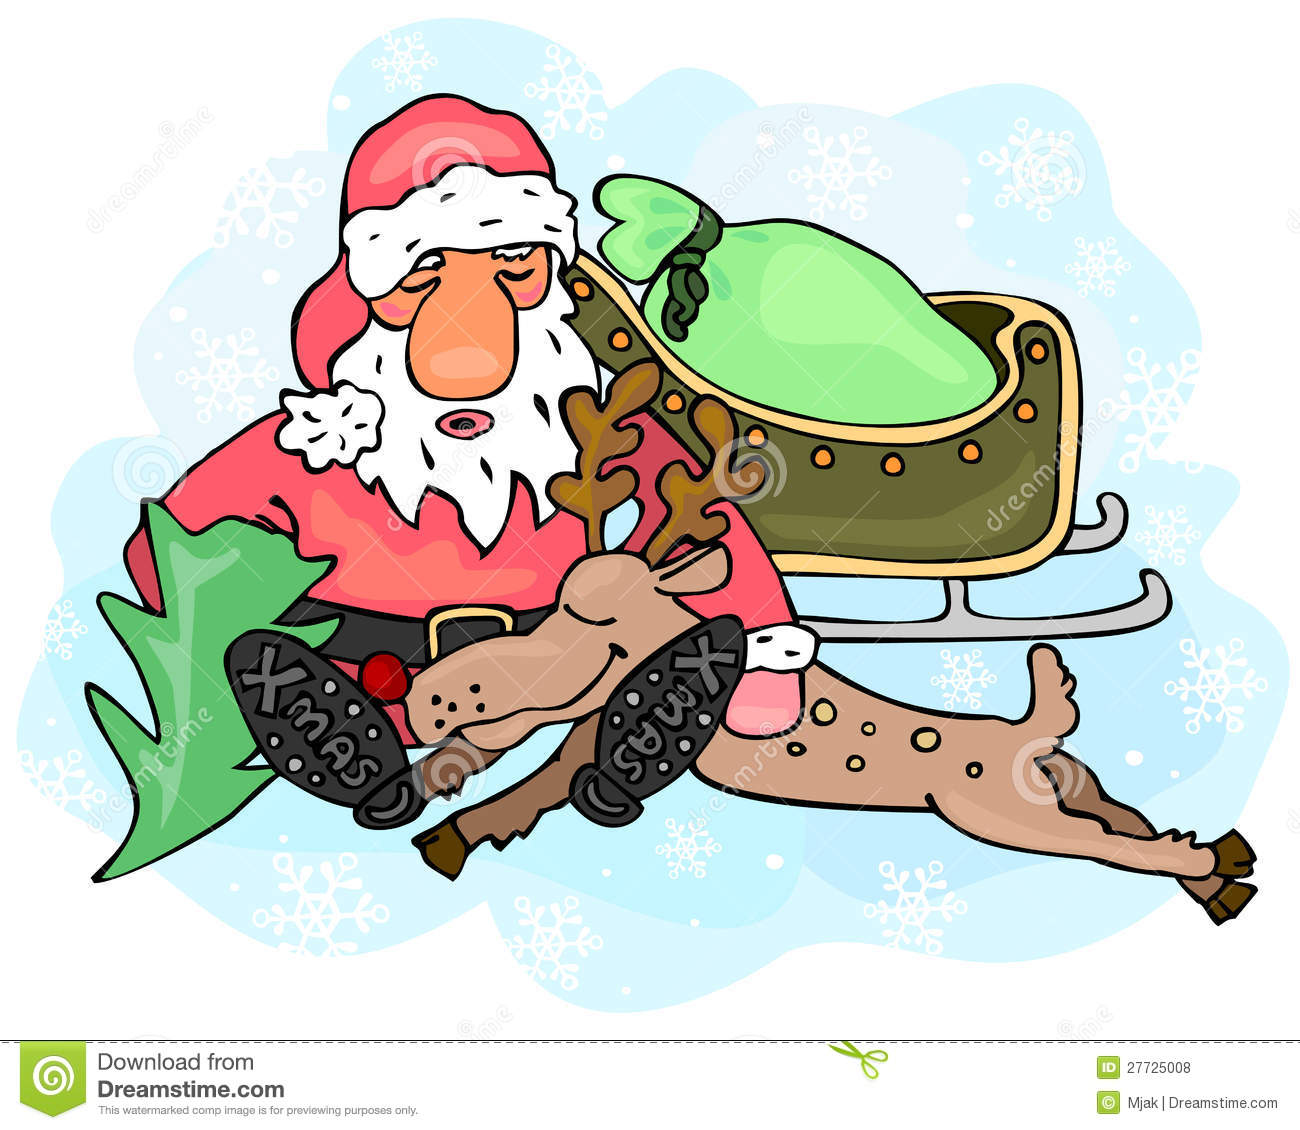 Tired Santa Claus And Reindeer Royalty Free Stock Photos   Image